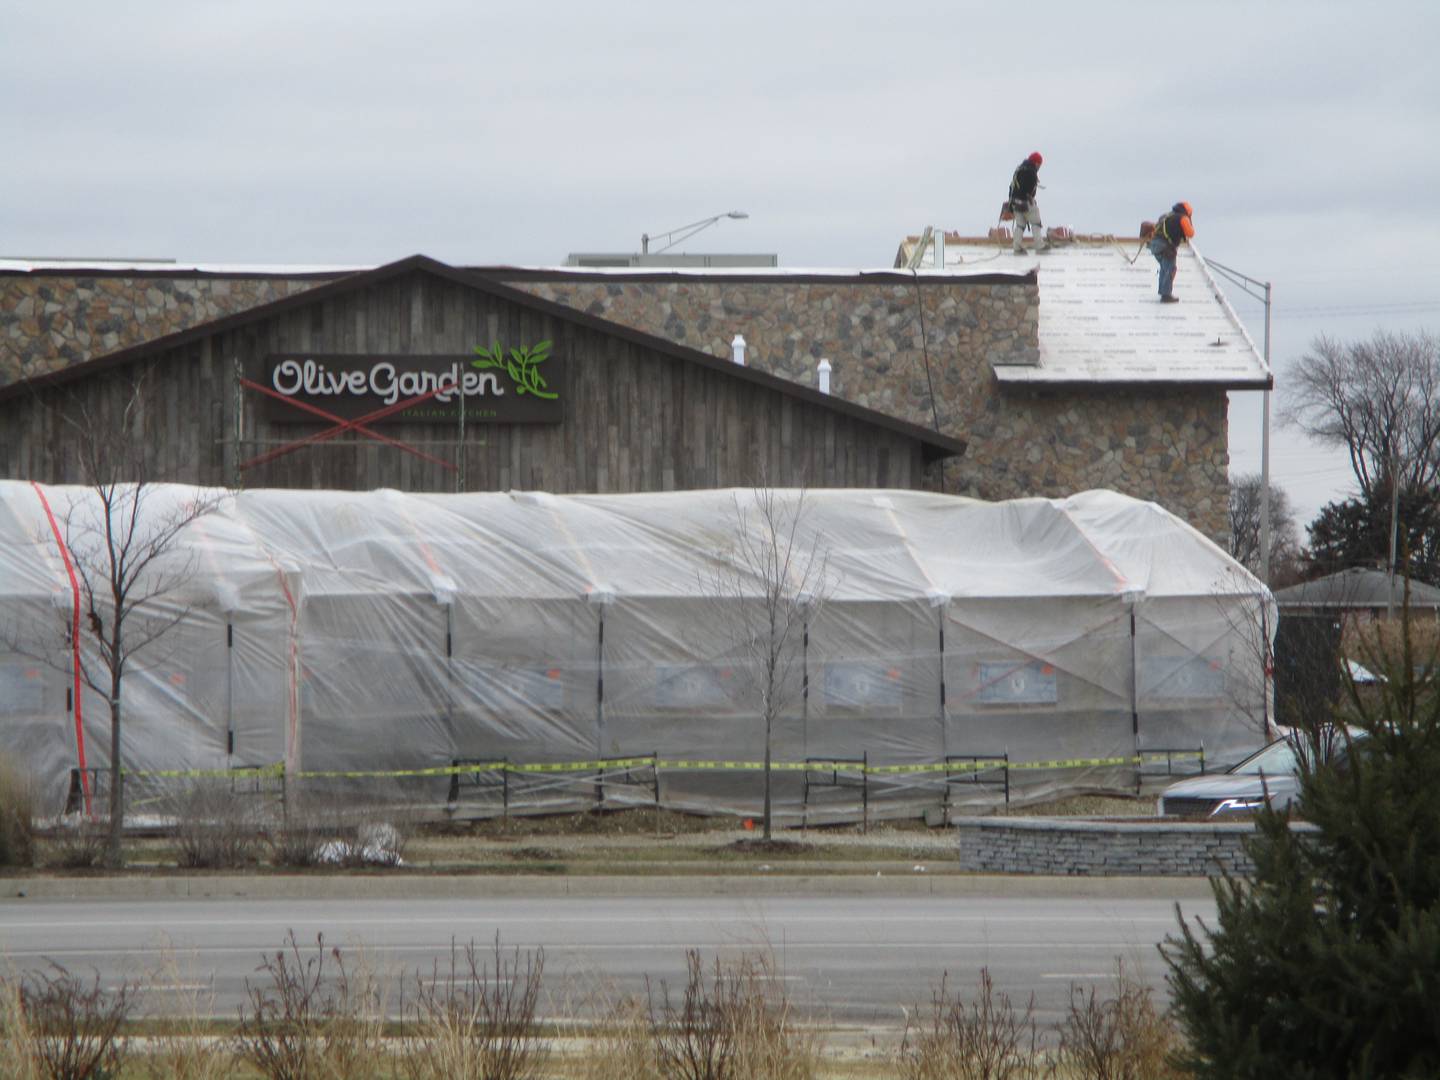 Workers can be seen Friday, Jan. 13, 2023 on the roof of the Olive Garden restaurant under construction in Joliet.